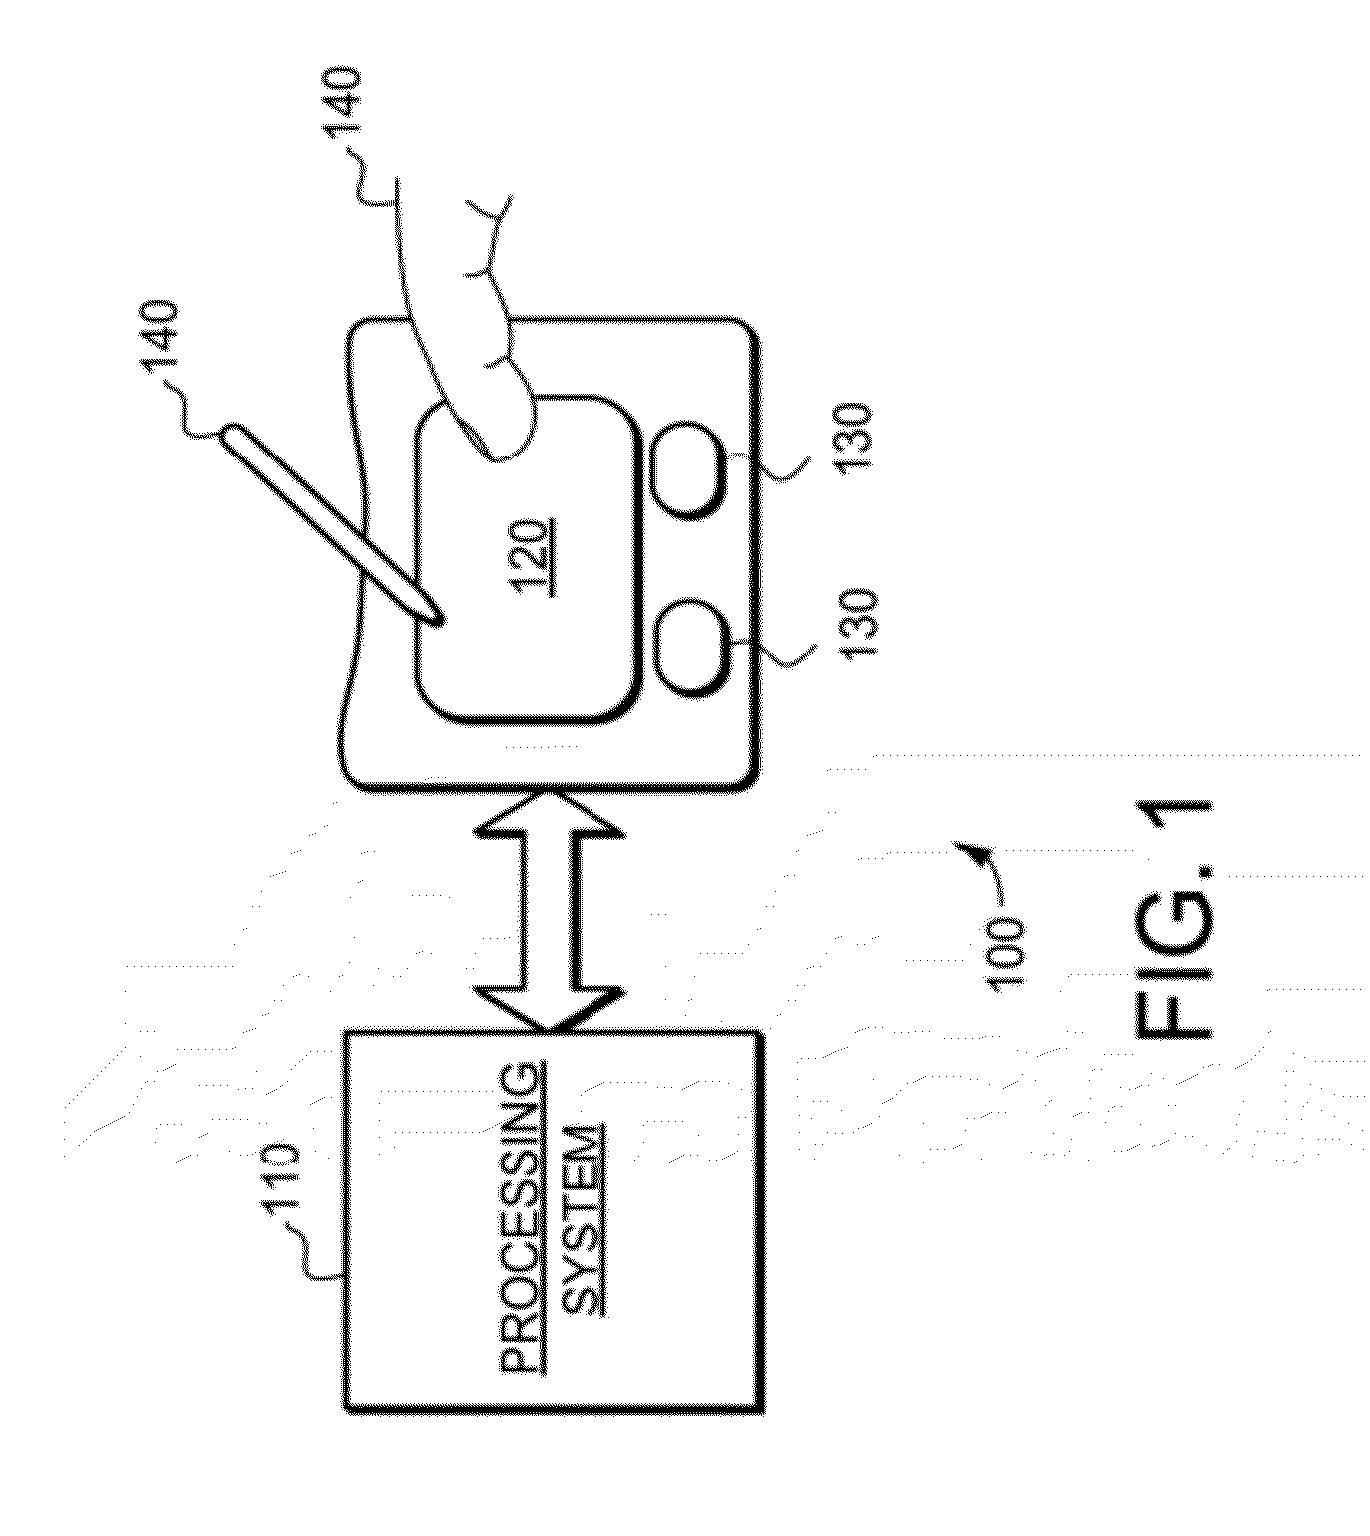 System and method for determining user input from occluded objects